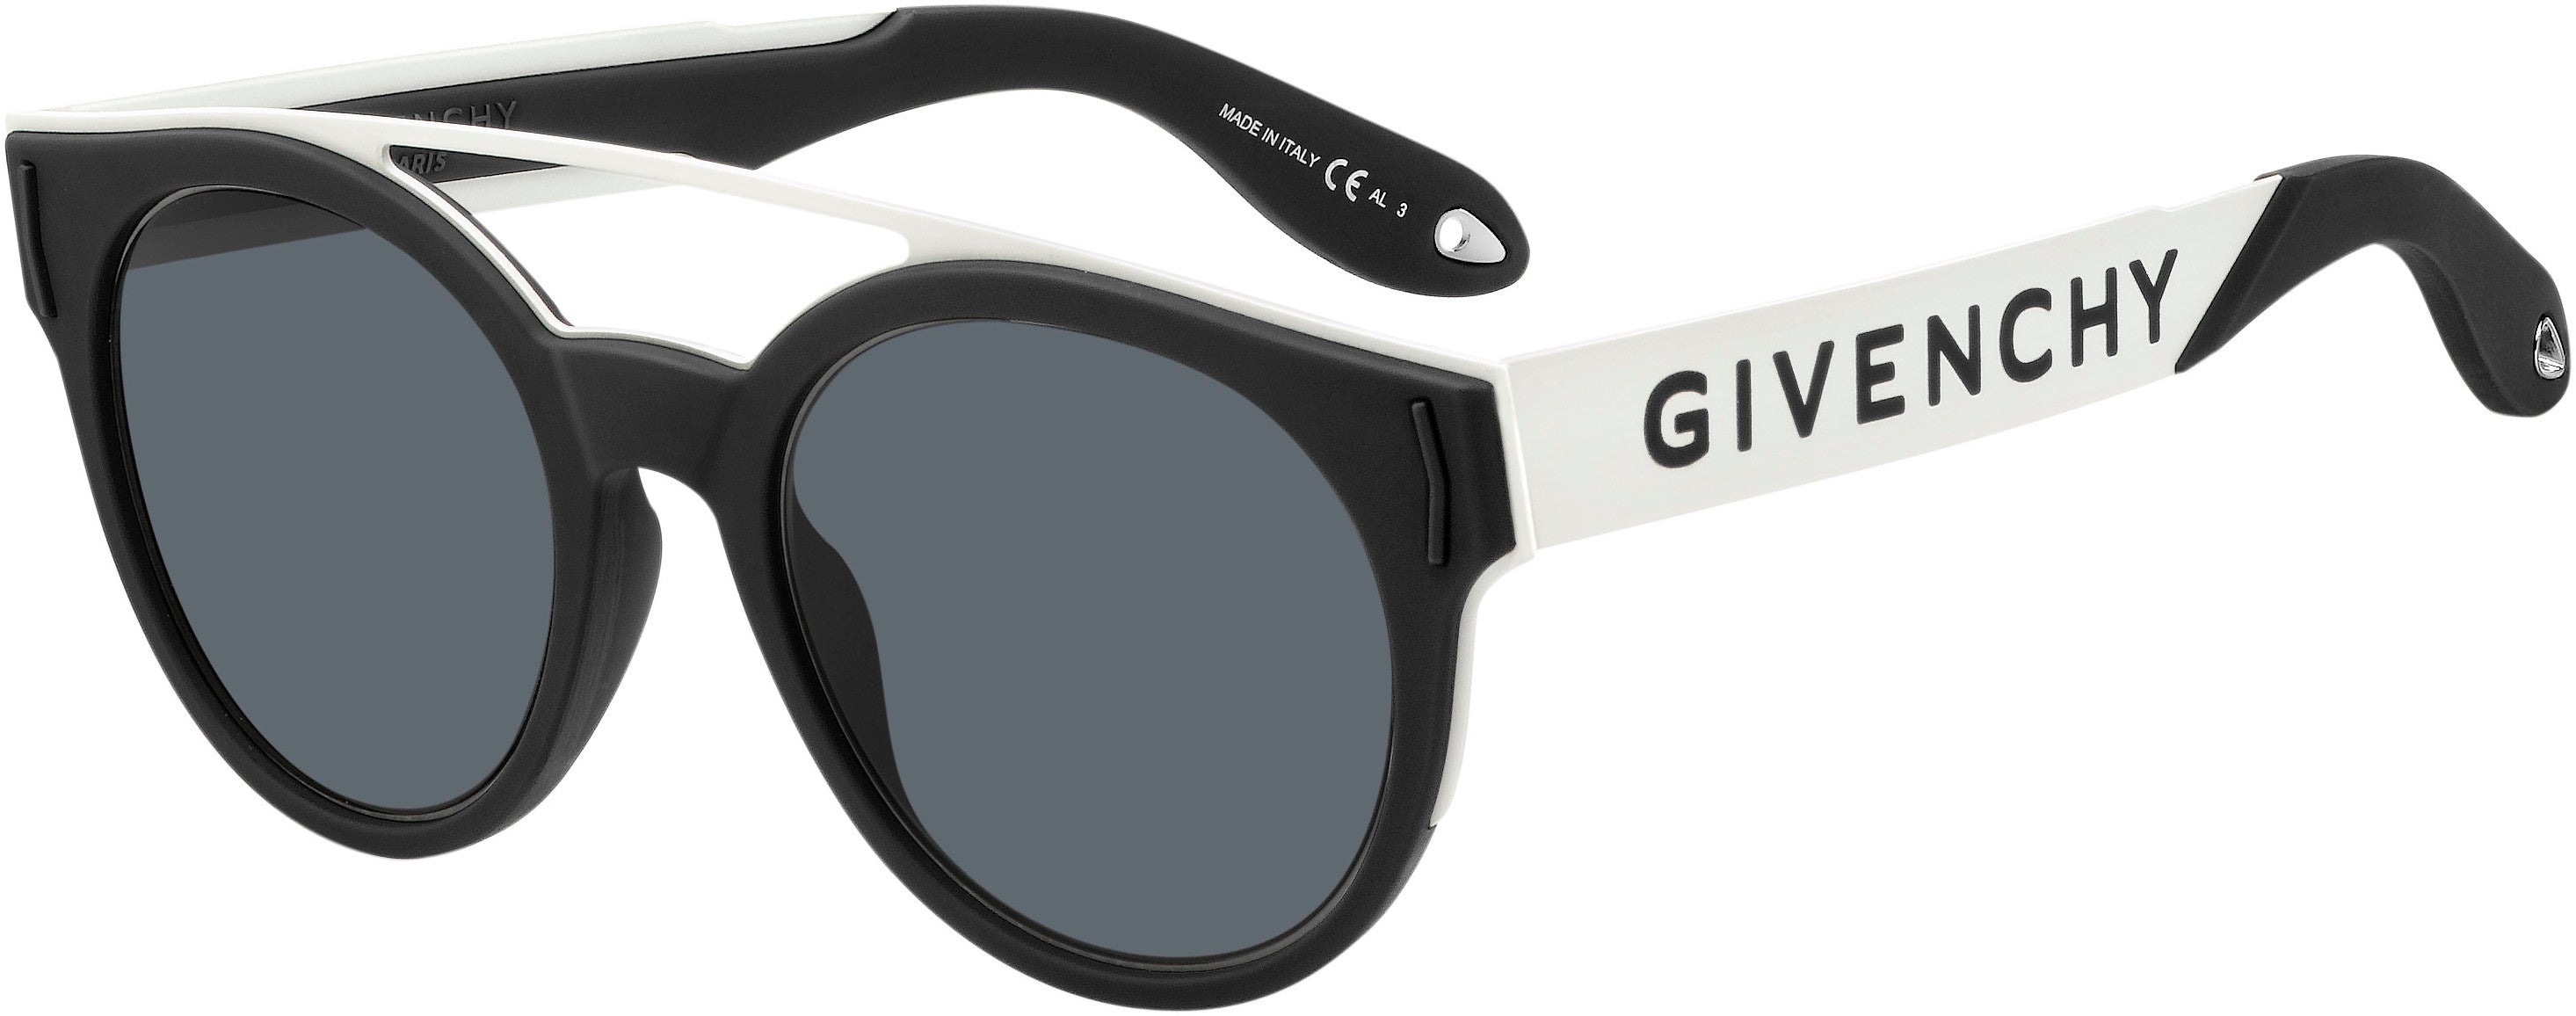  Givenchy 7017/N/S Oval Modified Sunglasses 080S-080S  Black White (IR Gray)